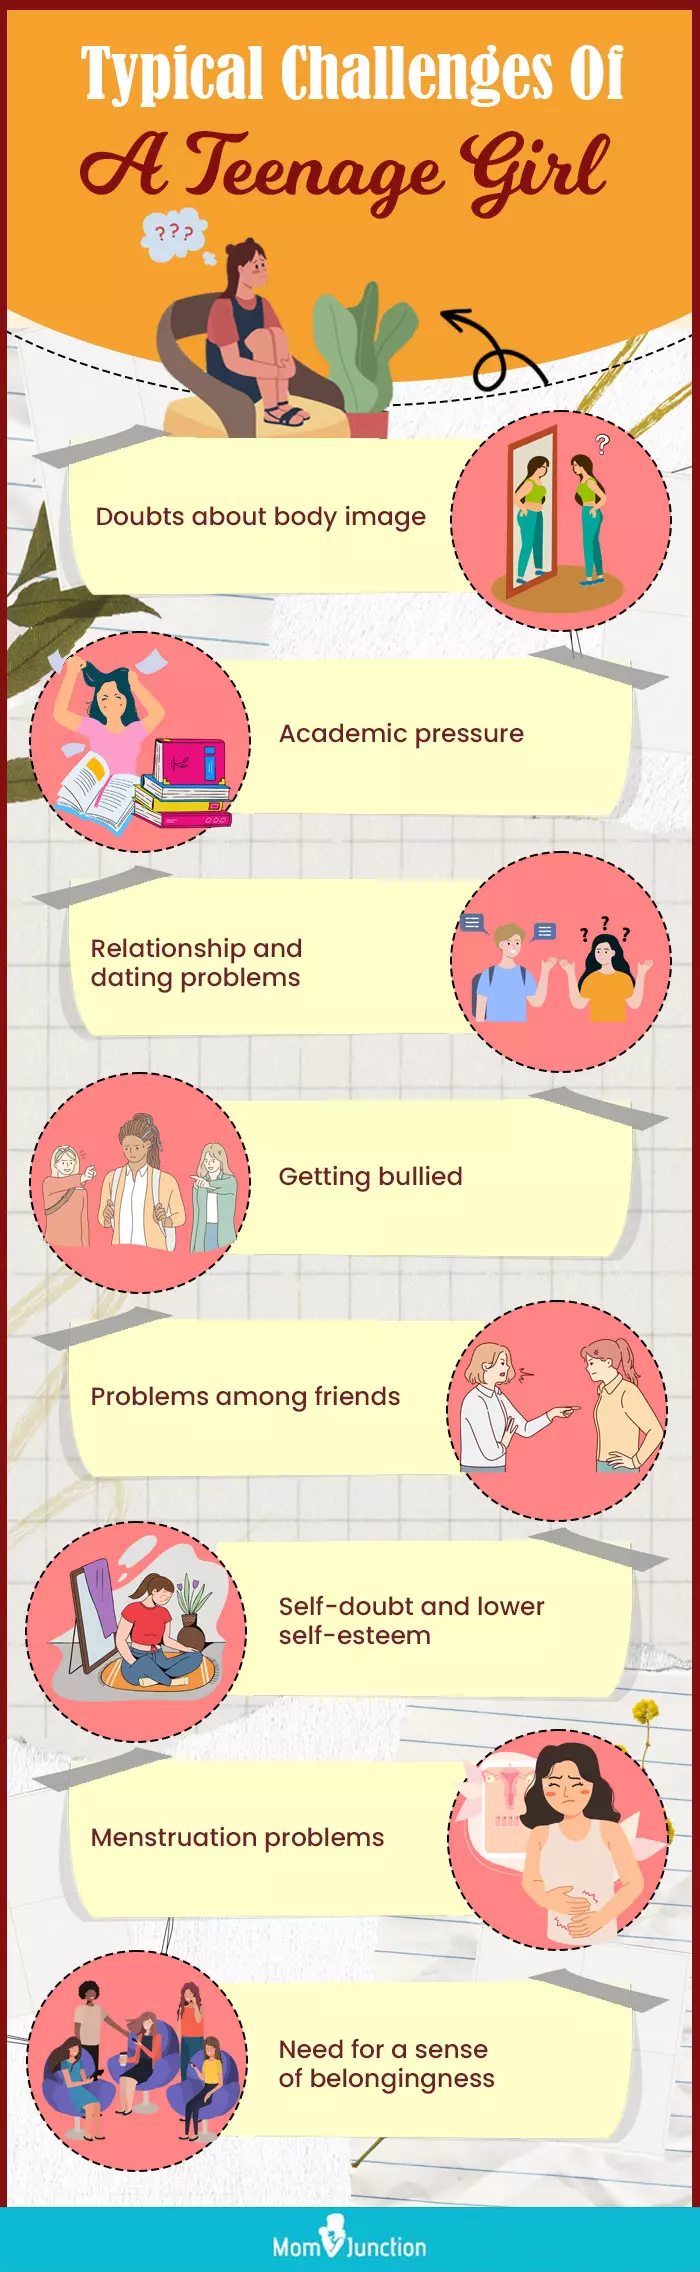 typical challenges of a teenage girl (infographic)